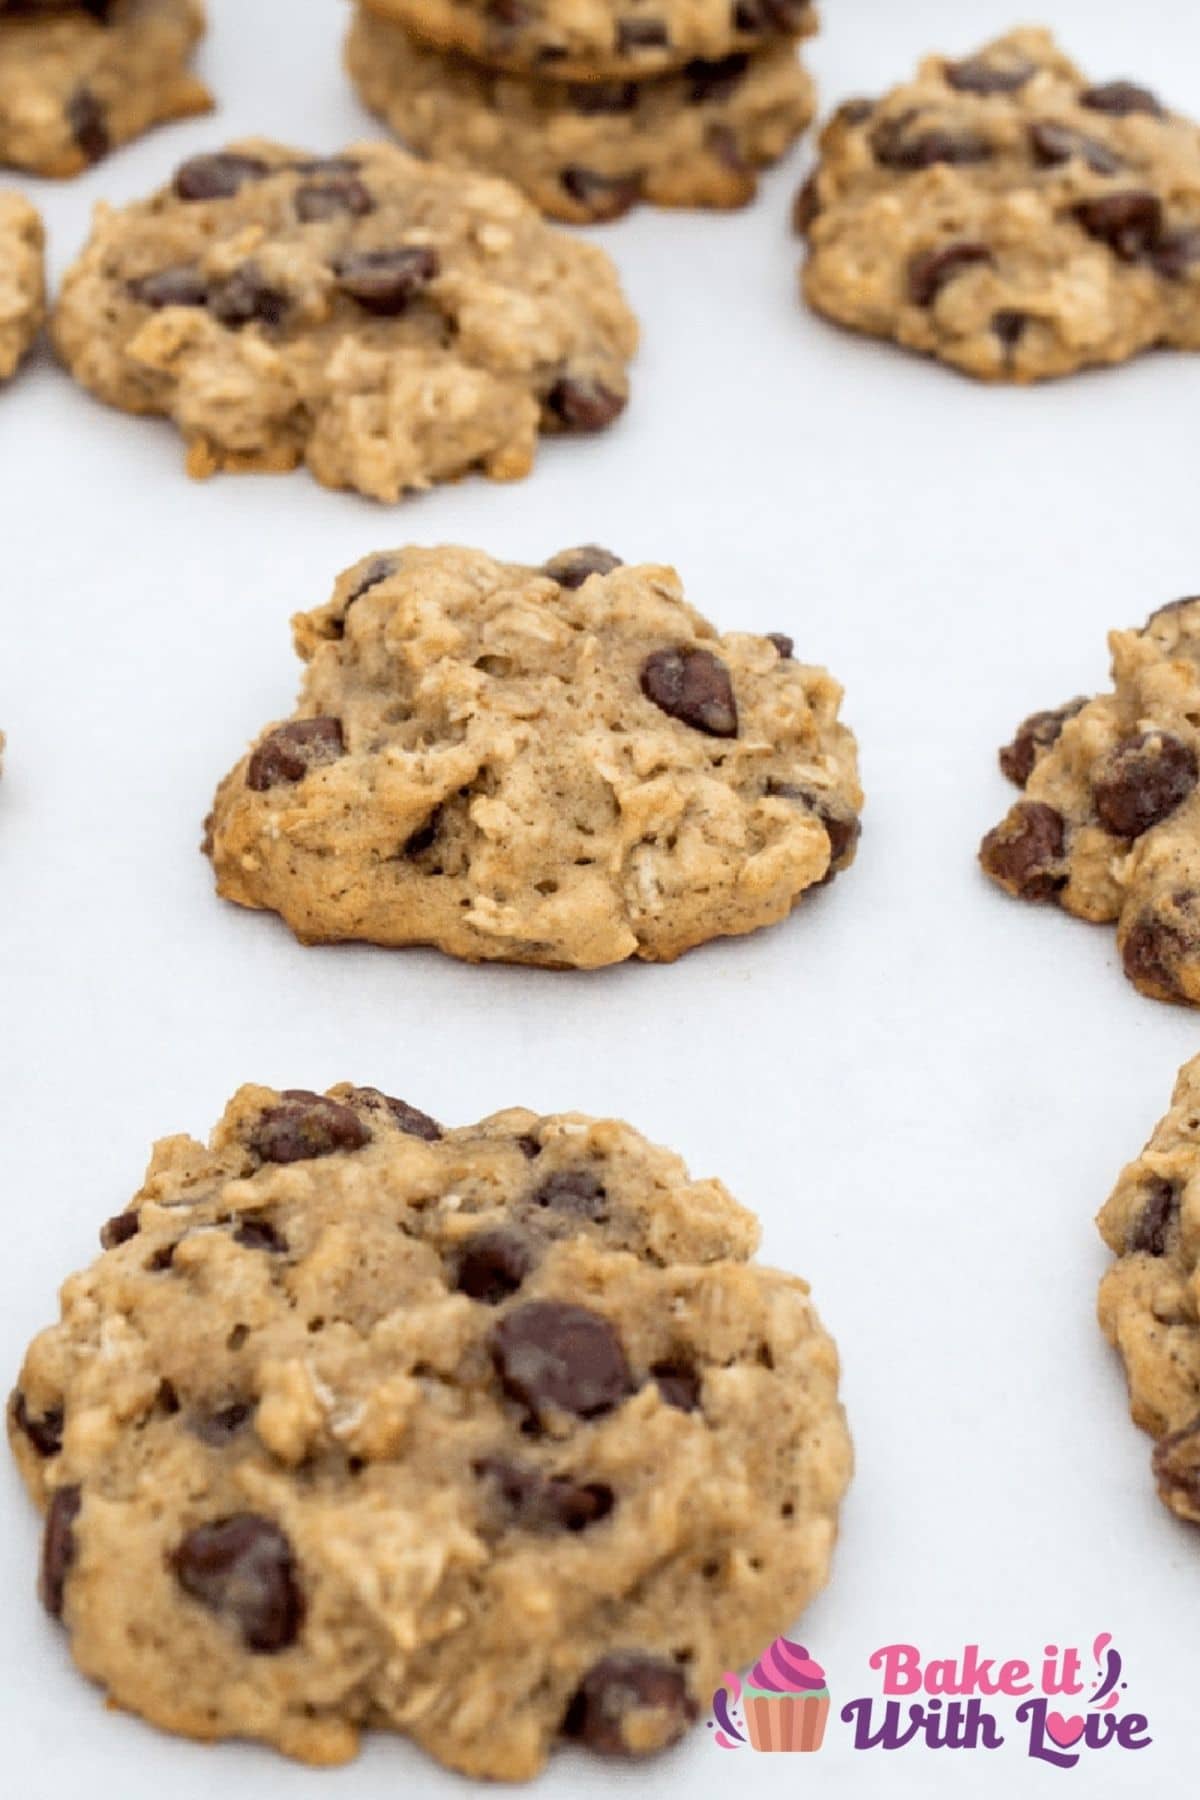 Tall view of the banana oatmeal chocolate chip cookies laid out and stacked on white background.